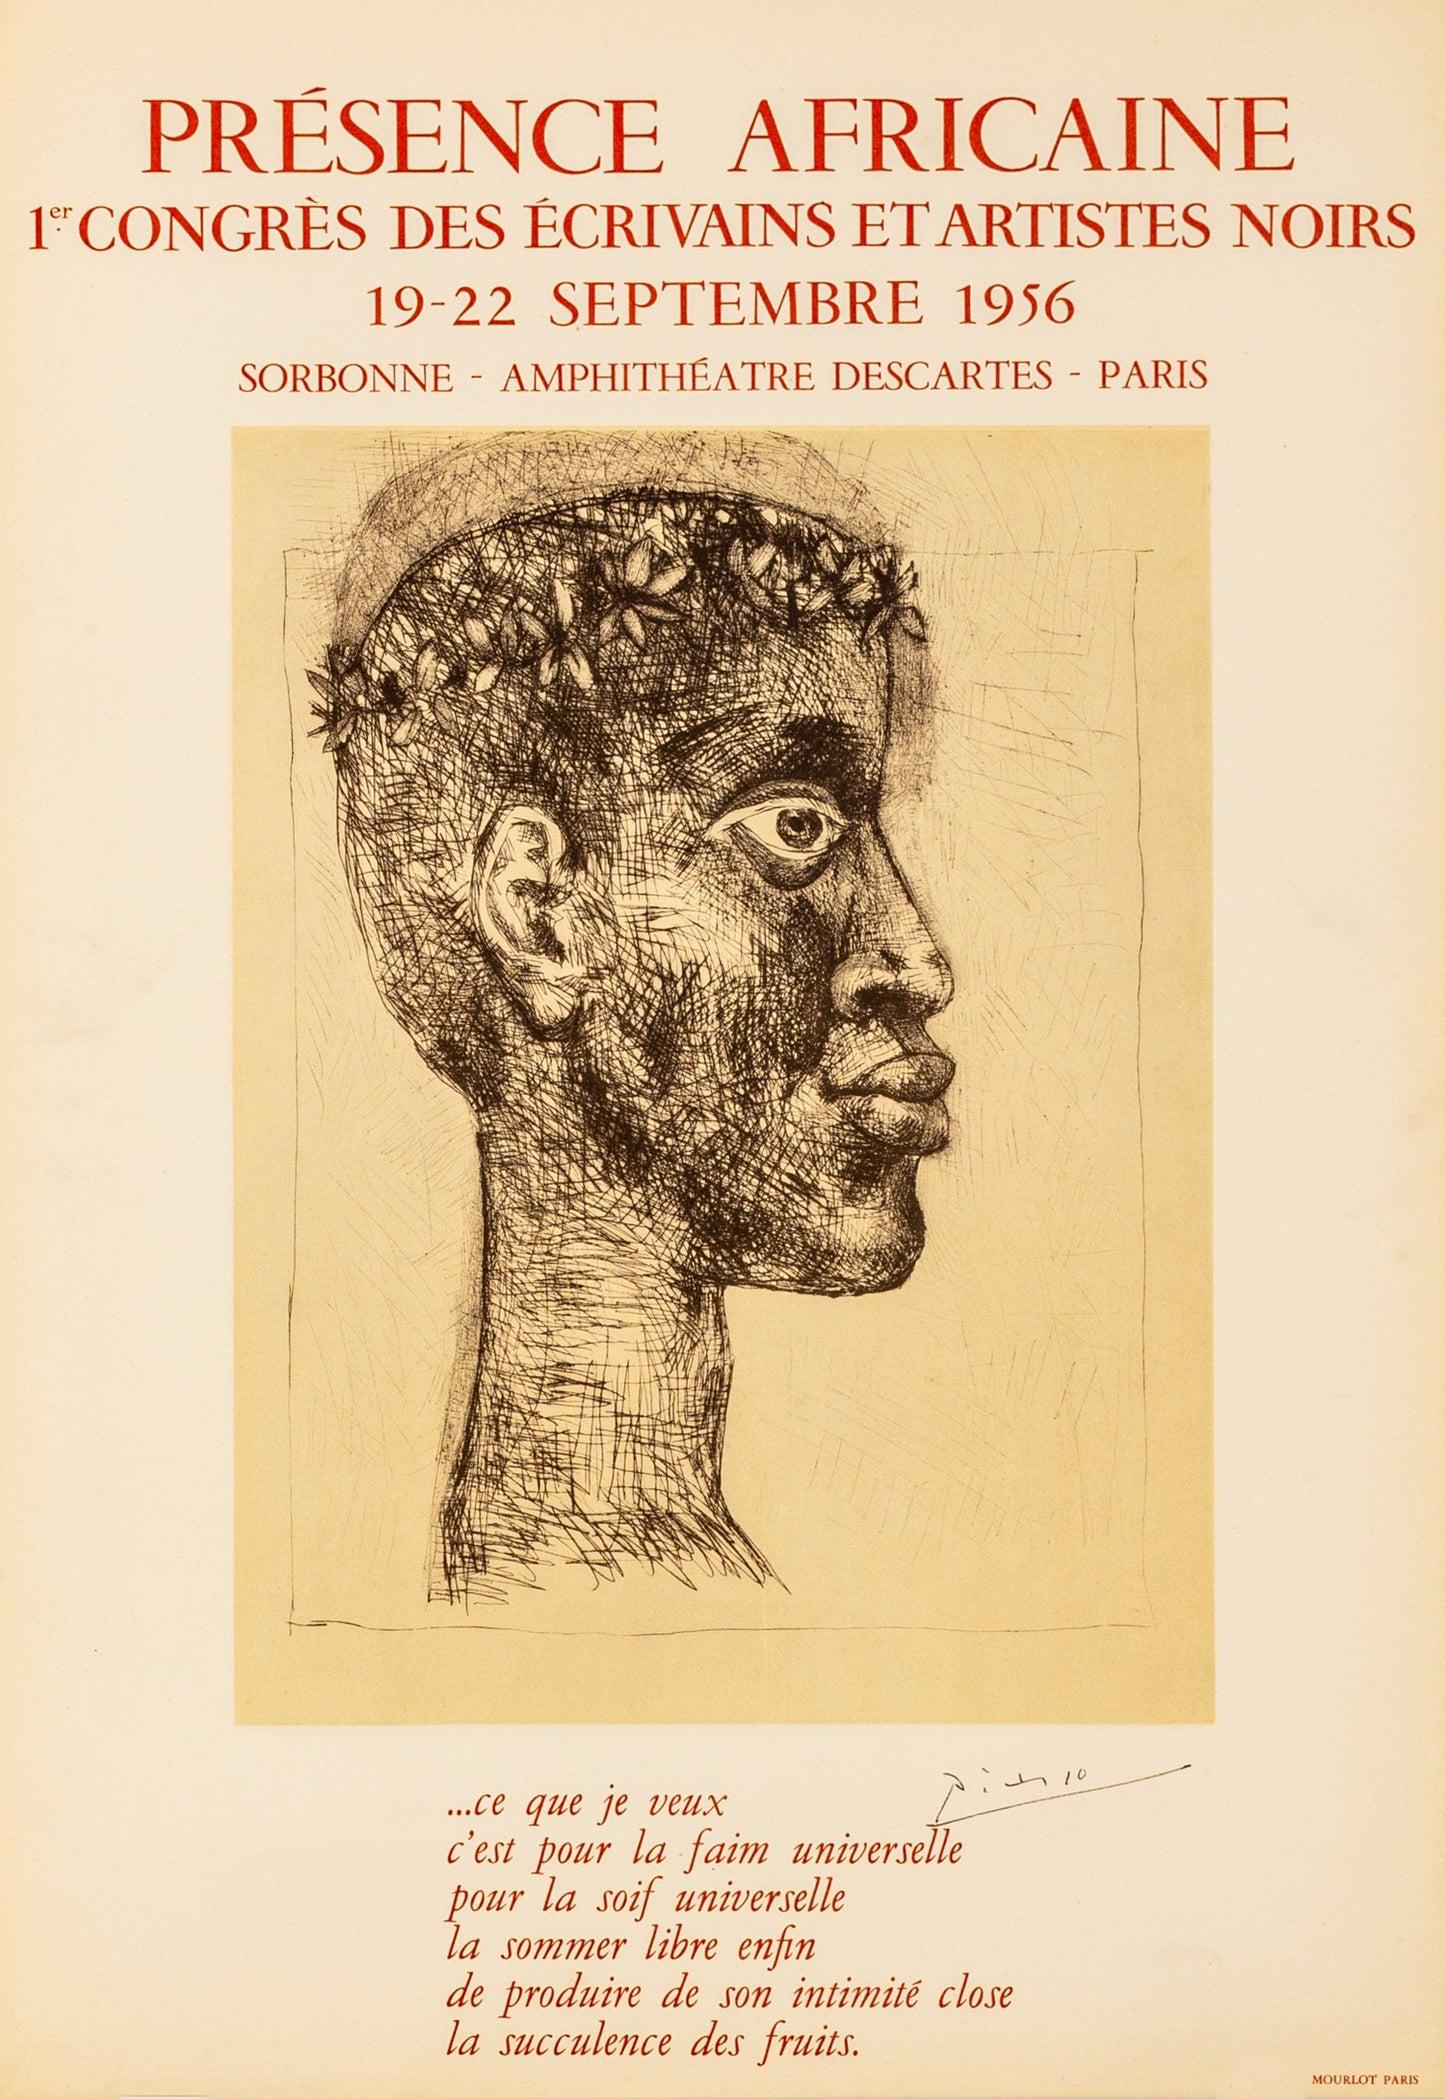 Artist: Pablo Picasso

Medium: Lithographic Poster, 1956

Dimensions: 25.9 x 18.7 in, 66 x 47.5 cm

Arches Paper - Excellent Condition A

This lithographic poster was designed to promote the first Congress of Black writers and artists at la Sorbonne